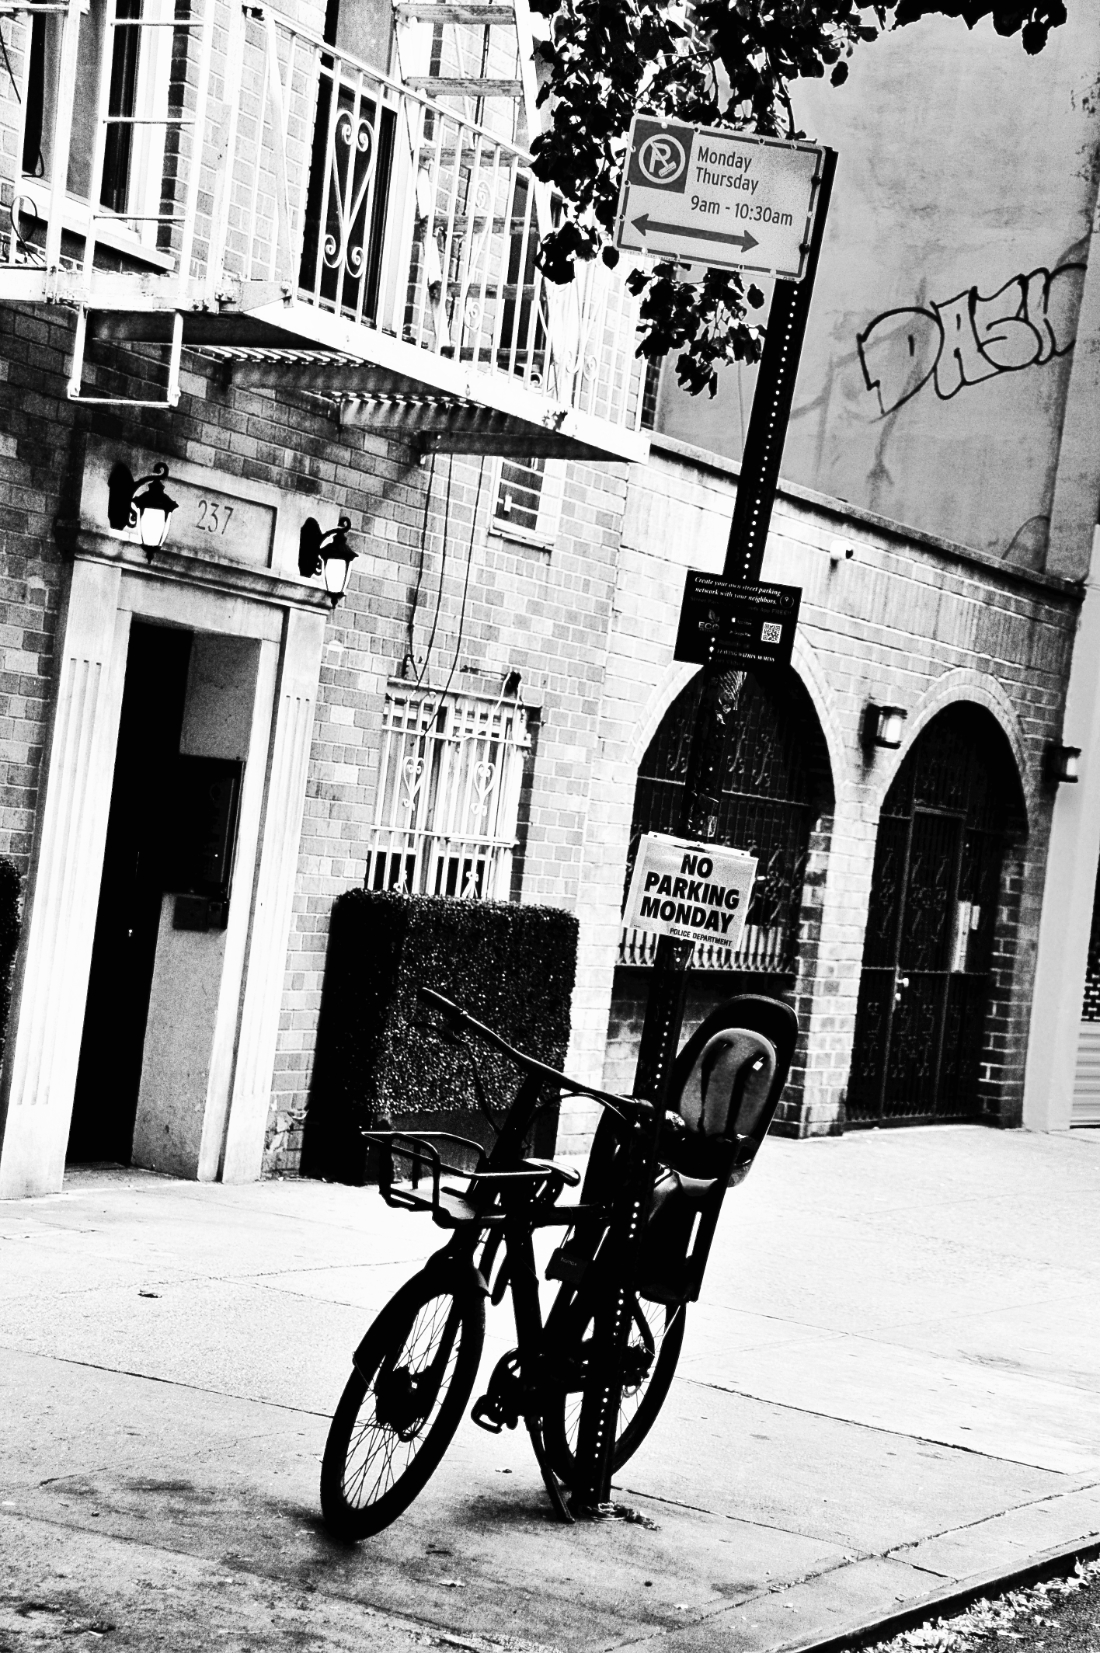 bicycle locked to pole that says no parking monday